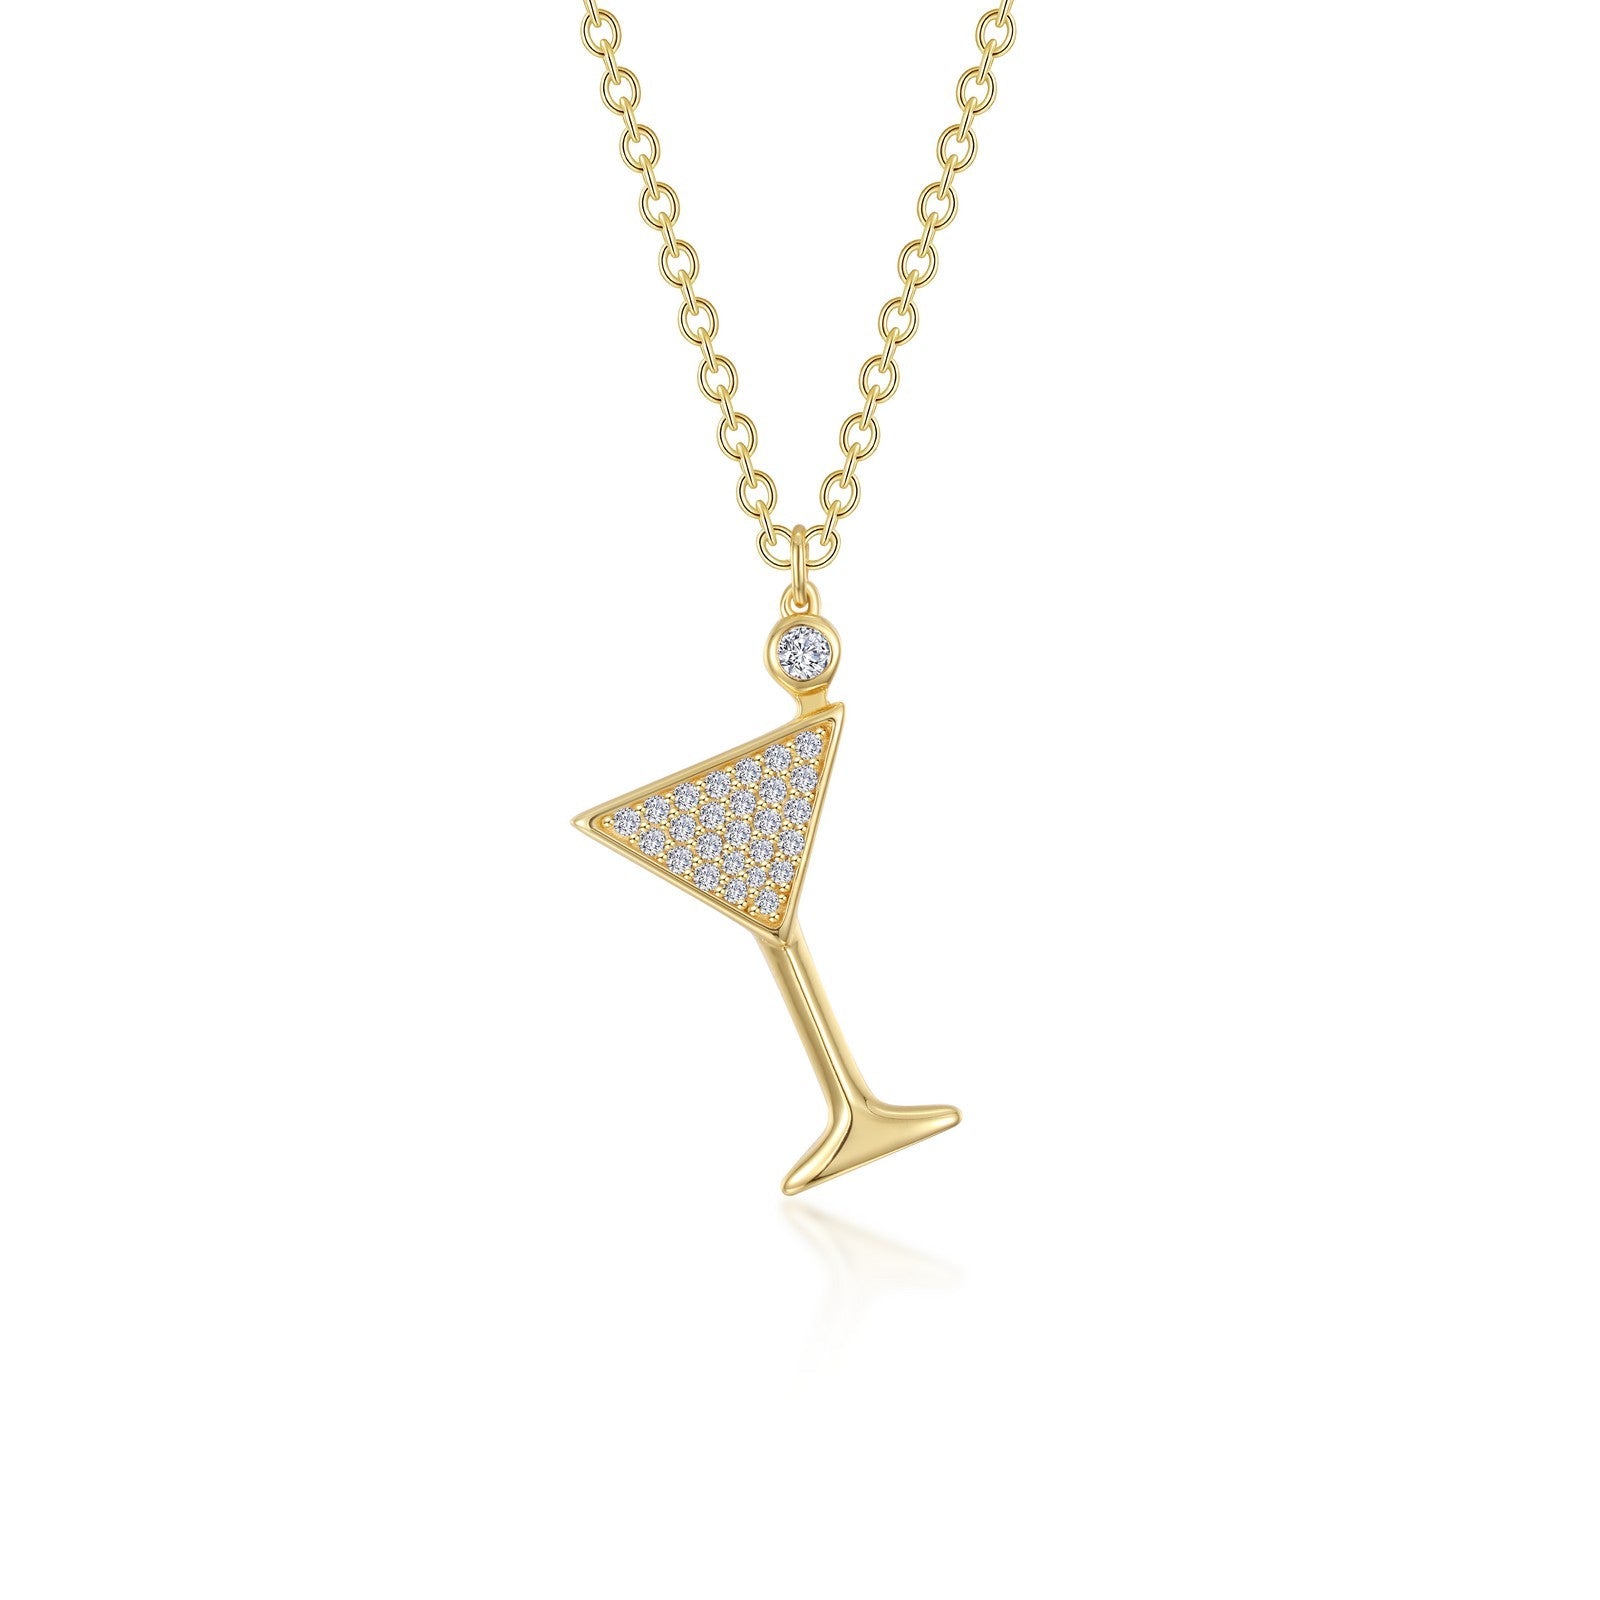 Pave Martini Glass Necklace-N0332CLG